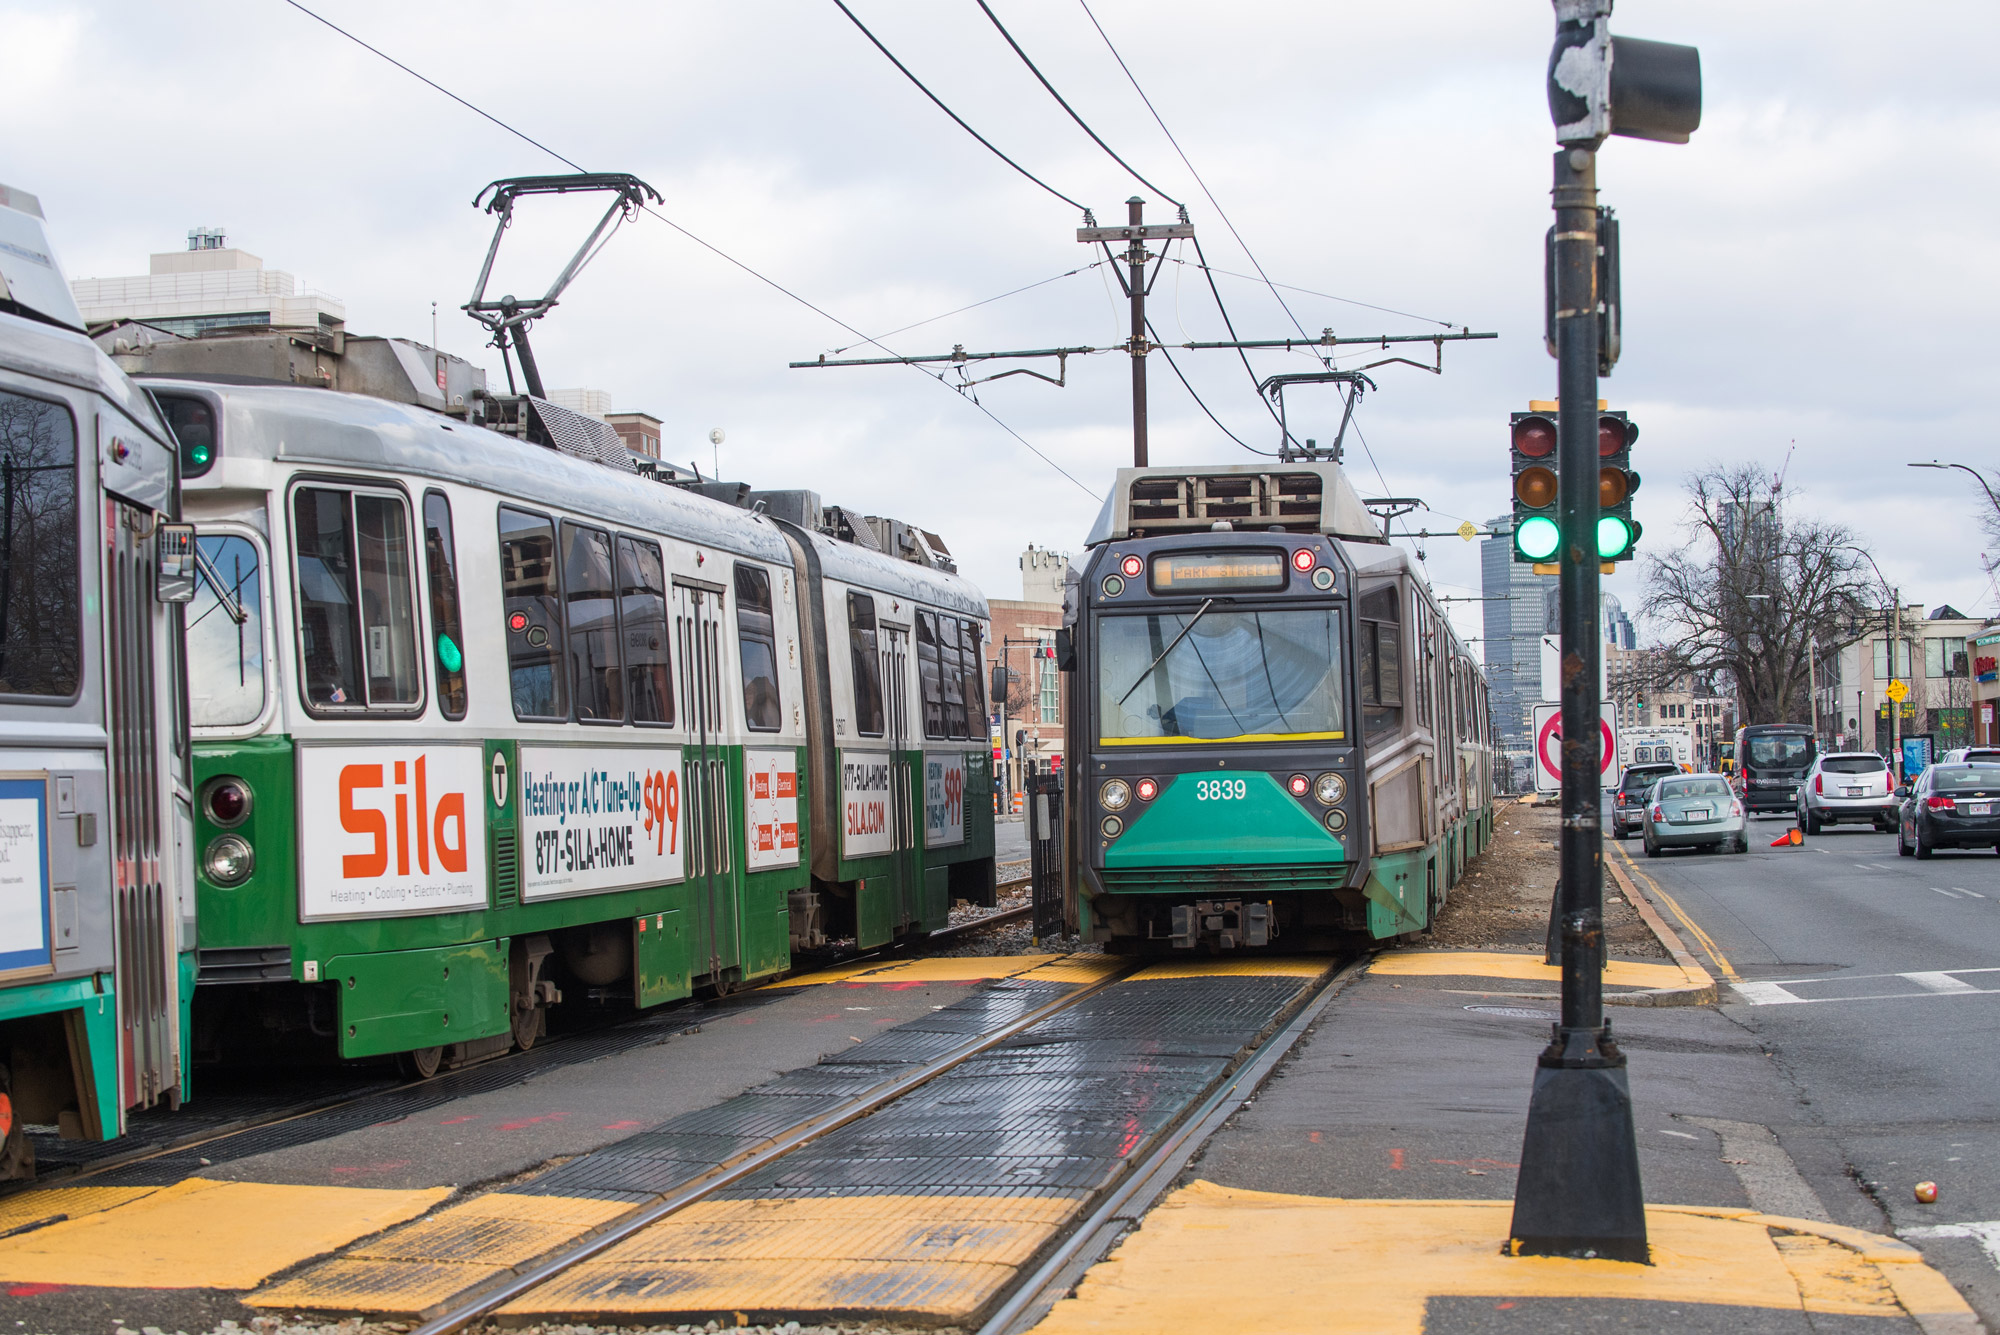 Two greenline MBTA trains pass along Commonwealth Avenue.